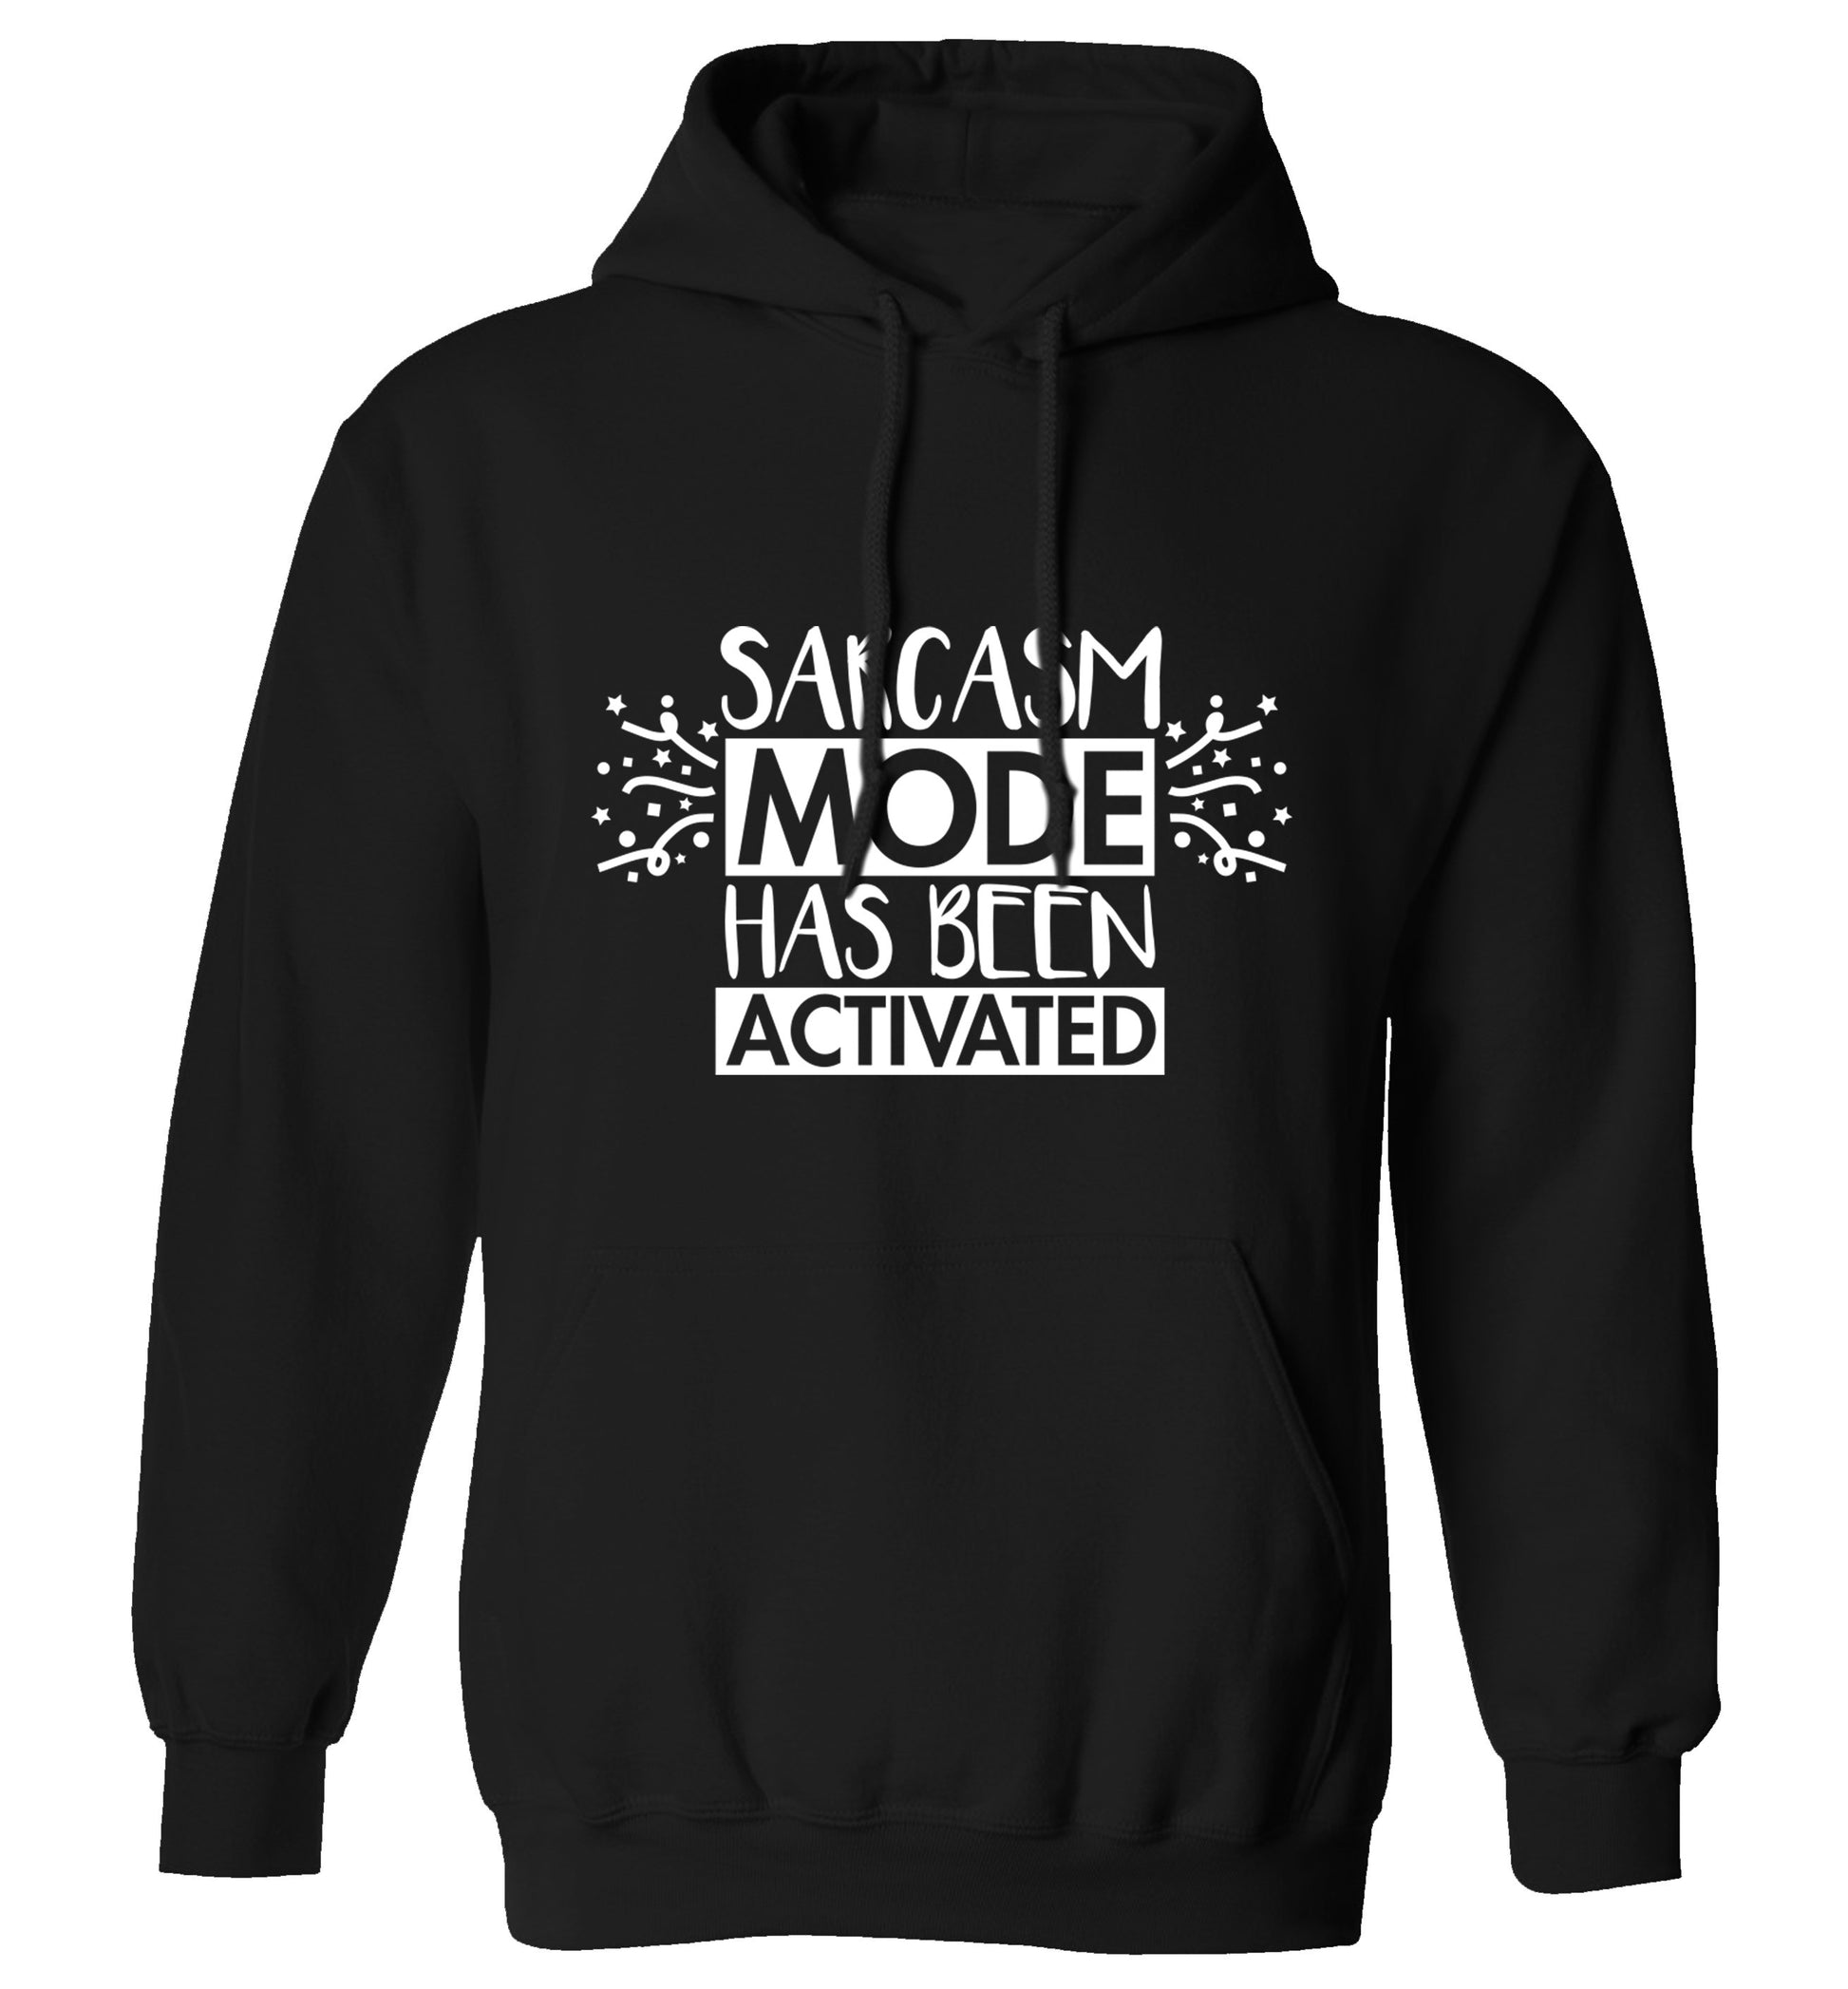 Sarcarsm mode has been activated adults unisex black hoodie 2XL